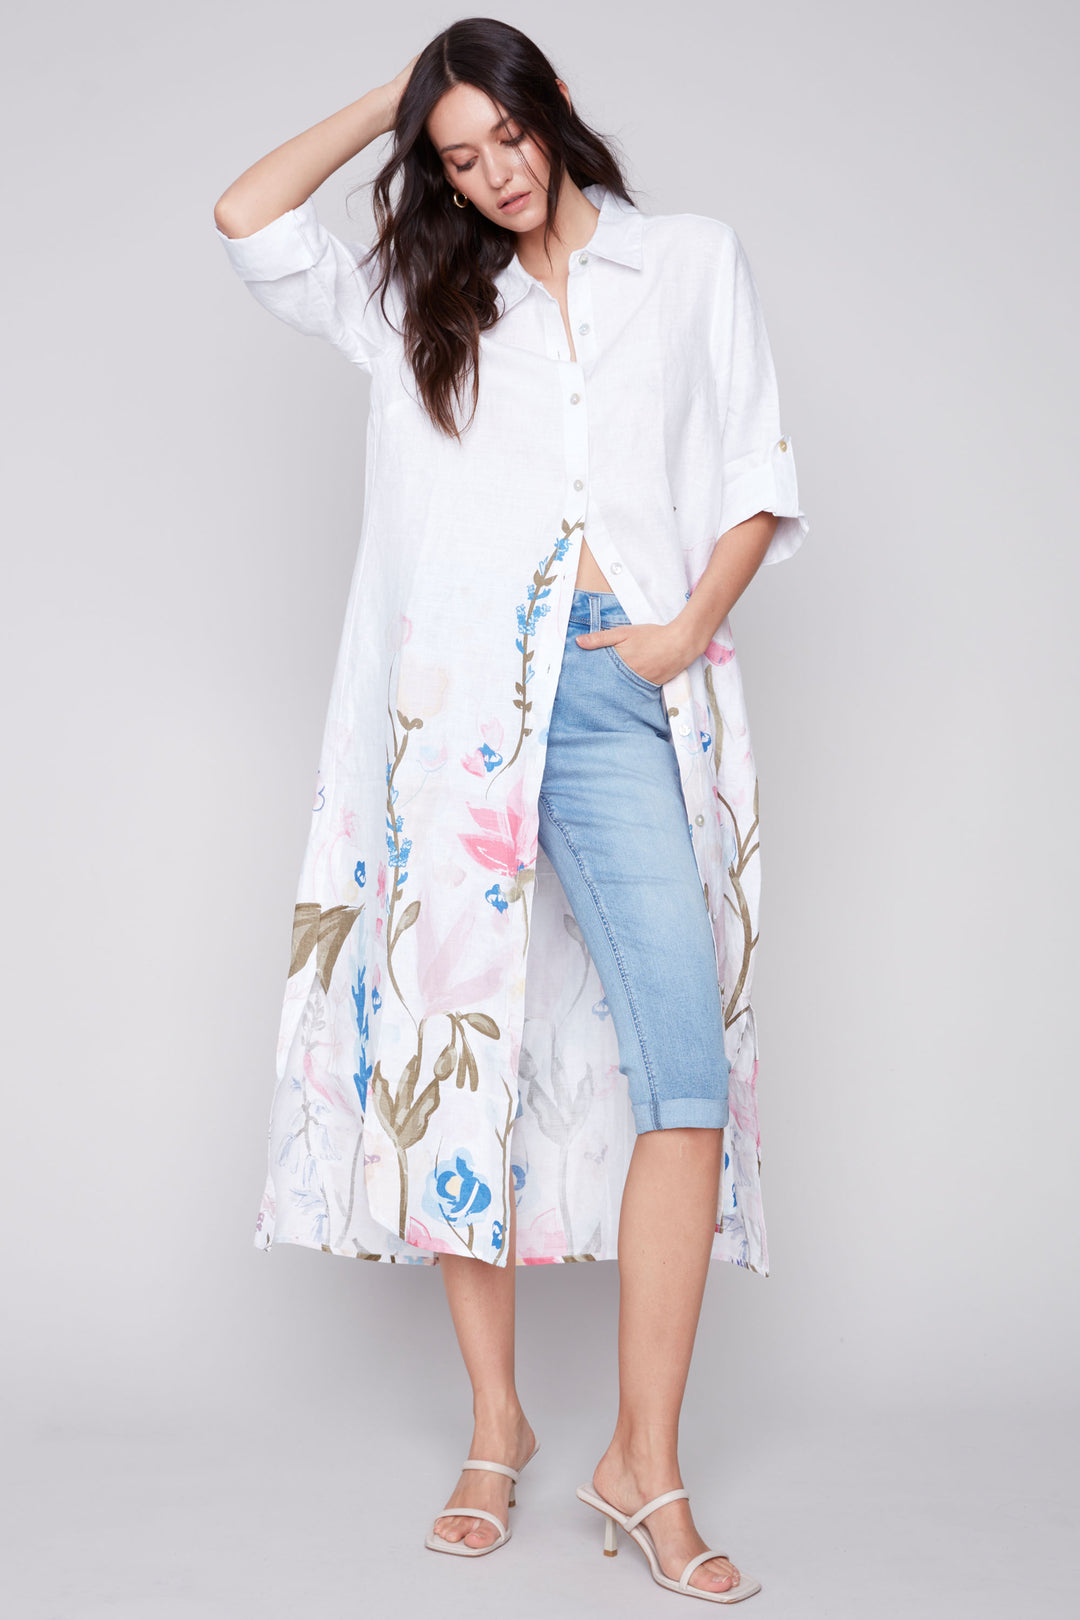 This long linen tunic duster dress boasts a lovely floral print and classic collar for a simple yet elegant look.